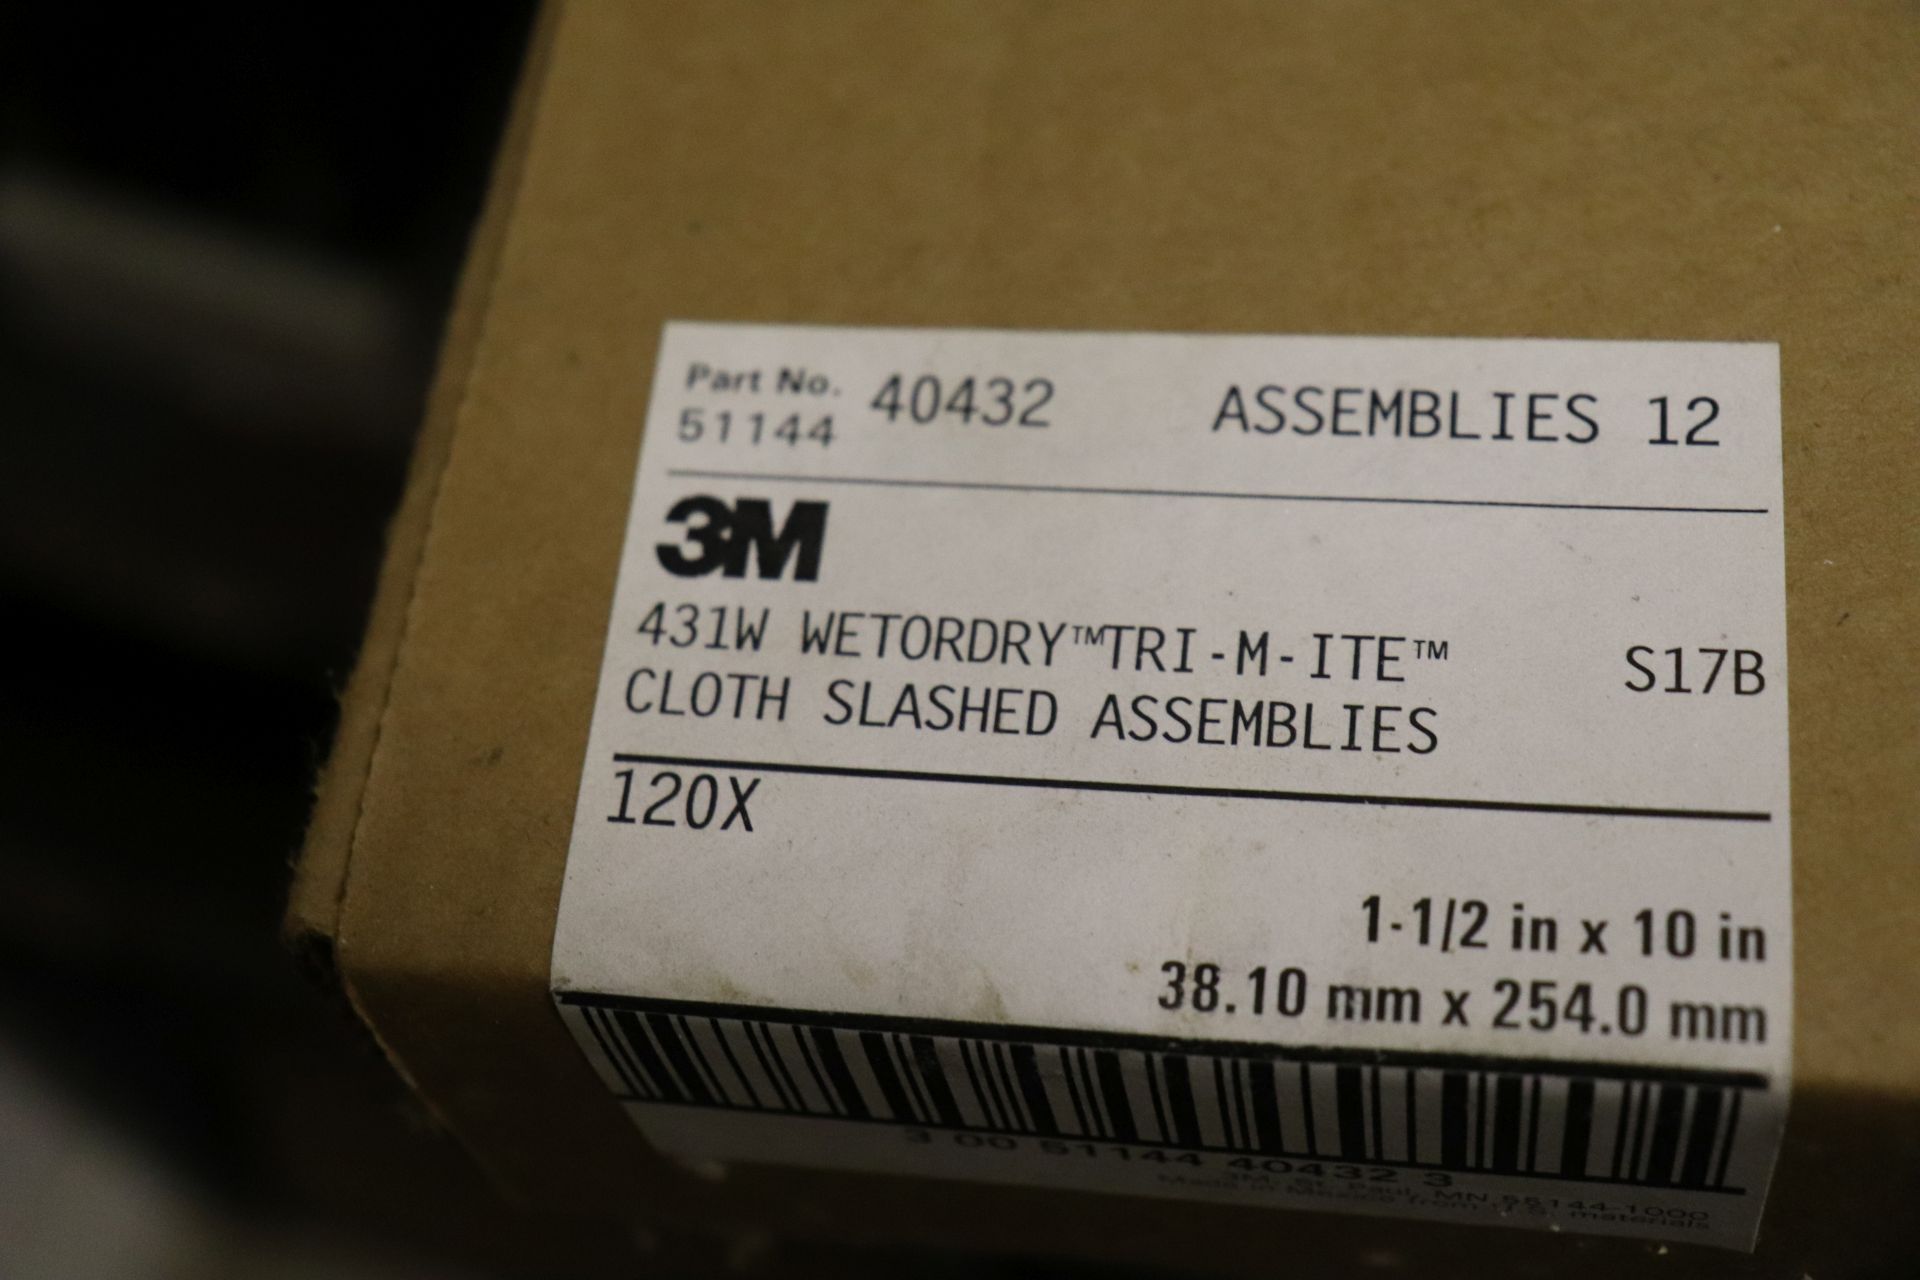 3M 431.W Wet or Dry Tri-M-Ite Cloth Slashed assemblies and fluorescent lamp starters - Image 2 of 3